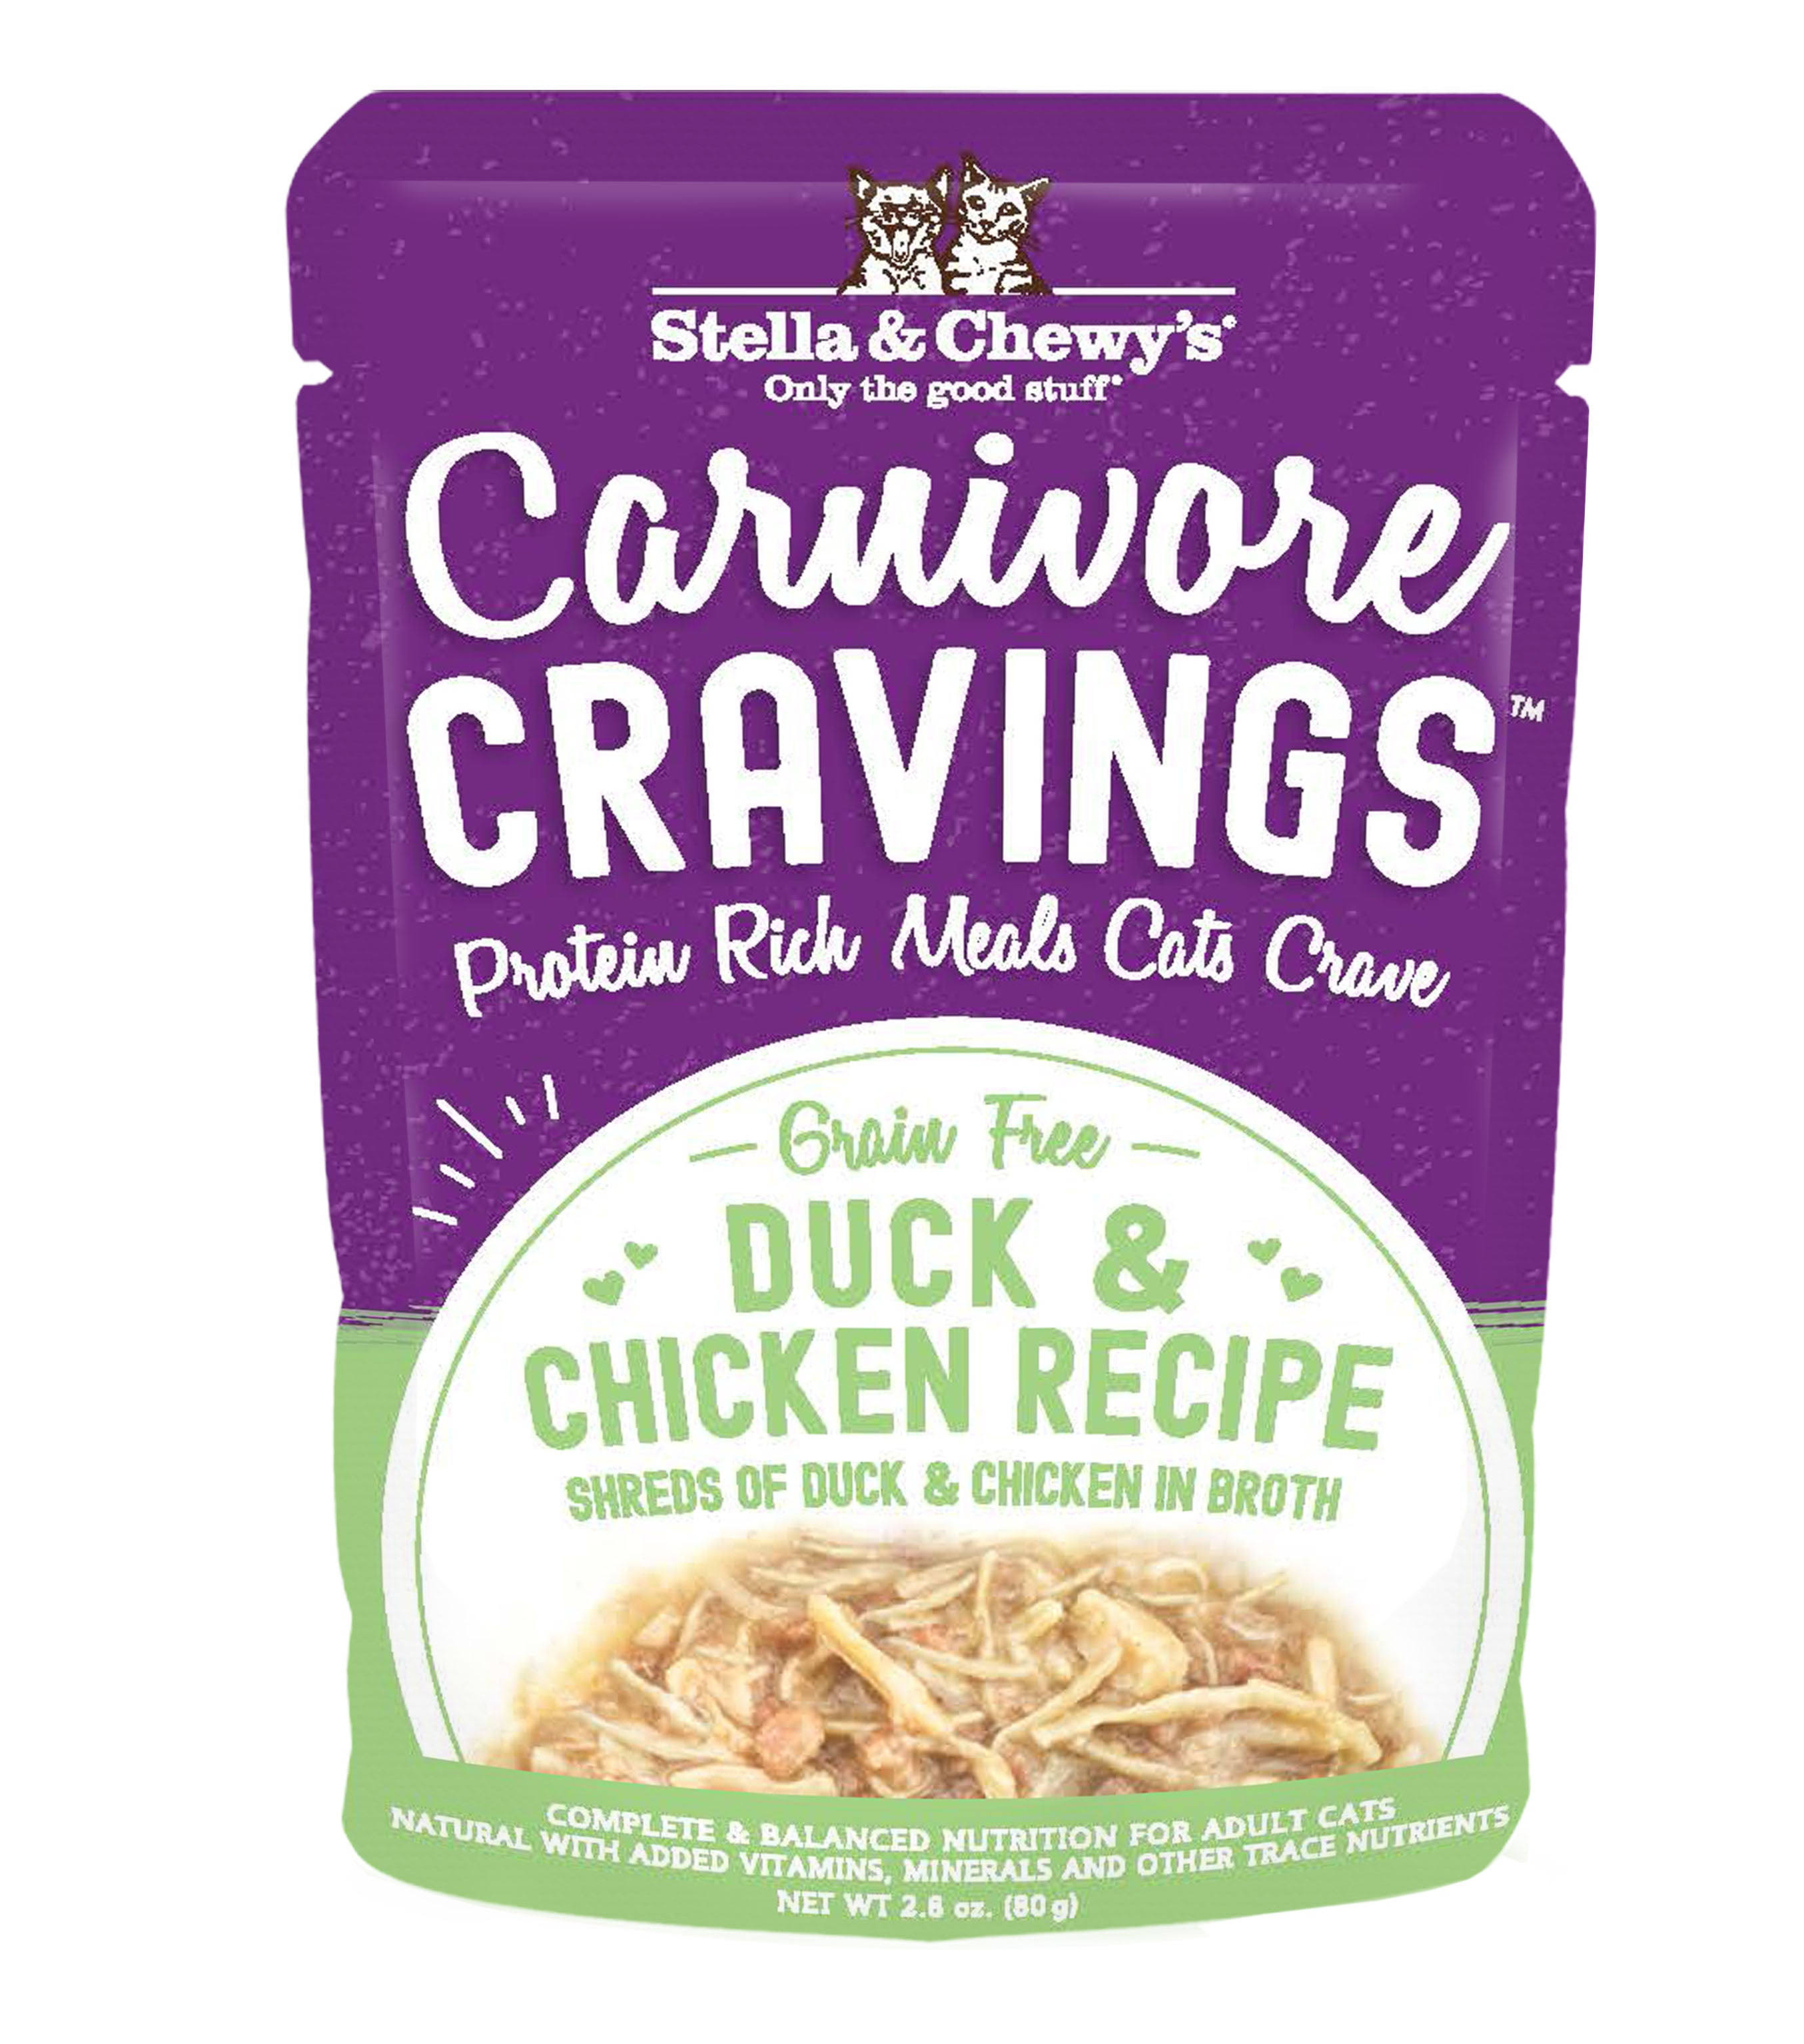 Stella & Chewy's Carnivore Cravings Chicken & Duck Recipe Cat Food, 2.8 oz